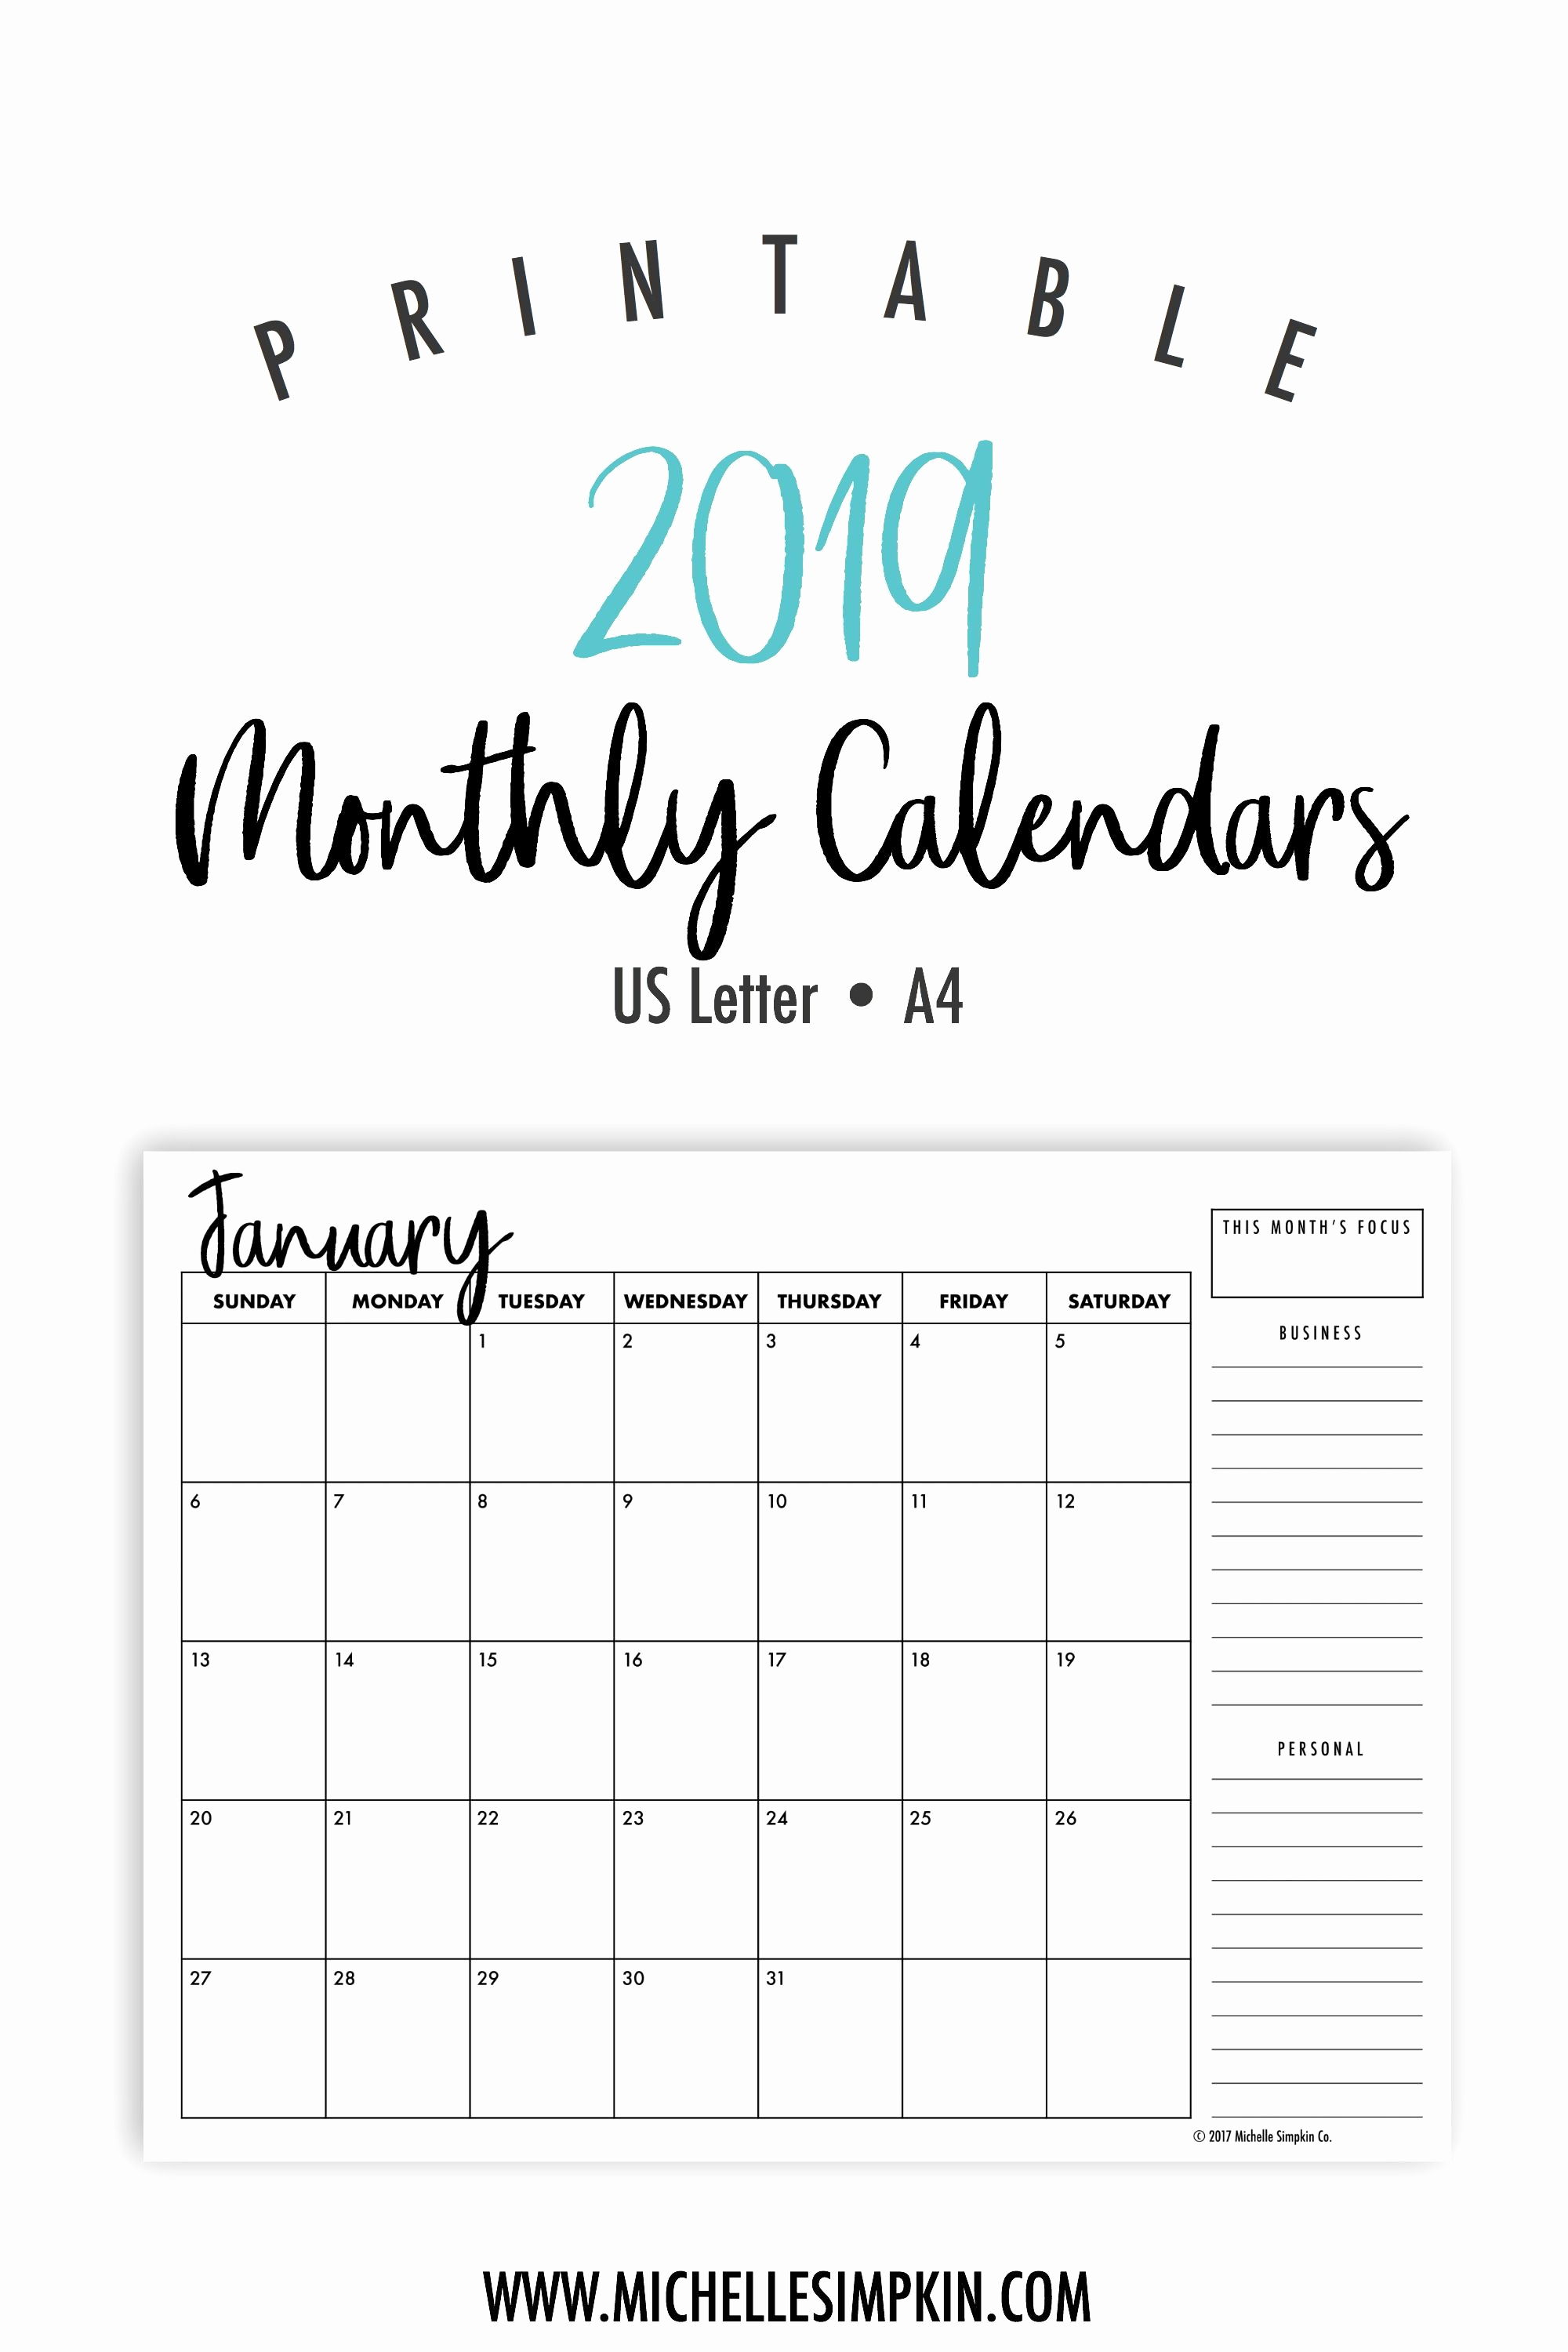 Weekly Calendar Template 2019 Lovely 2019 Printable Monthly Calendars • Landscape • Us Letter